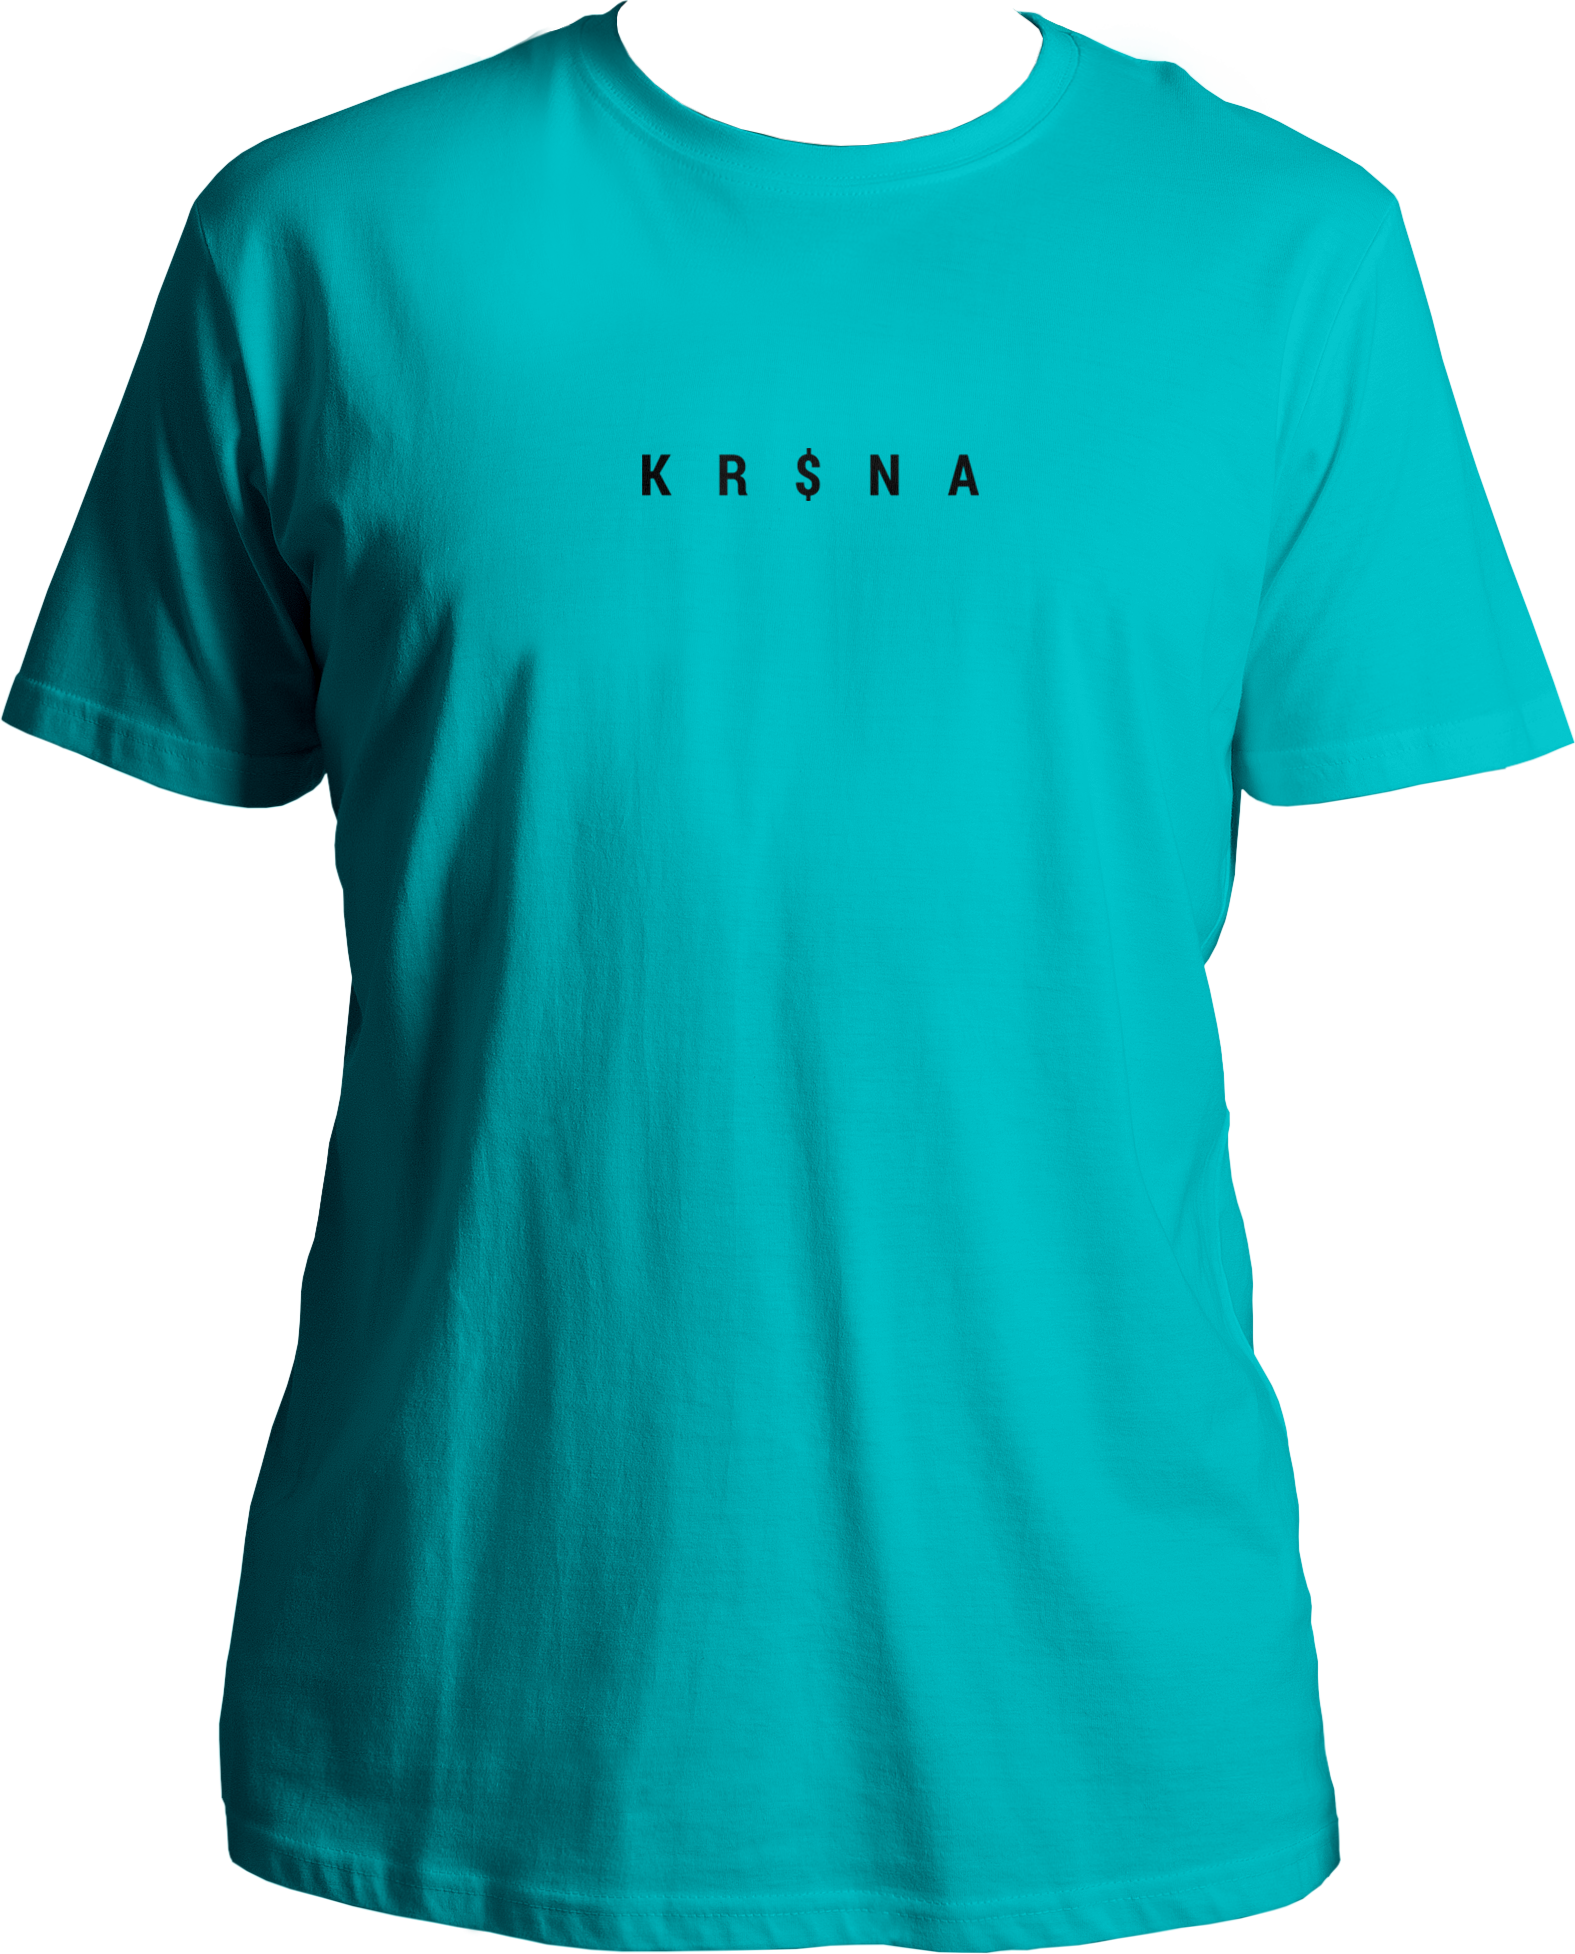 So, all you hip-hop heads, it’s time to elevate your wardrobe and rep your favorite artist. Whether you’re at a concert, chilling with friends, or just vibing solo, this tee is your go-to. Don’t miss out on this exclusive piece – shop now and let the world know you’re rolling with KR$NA.